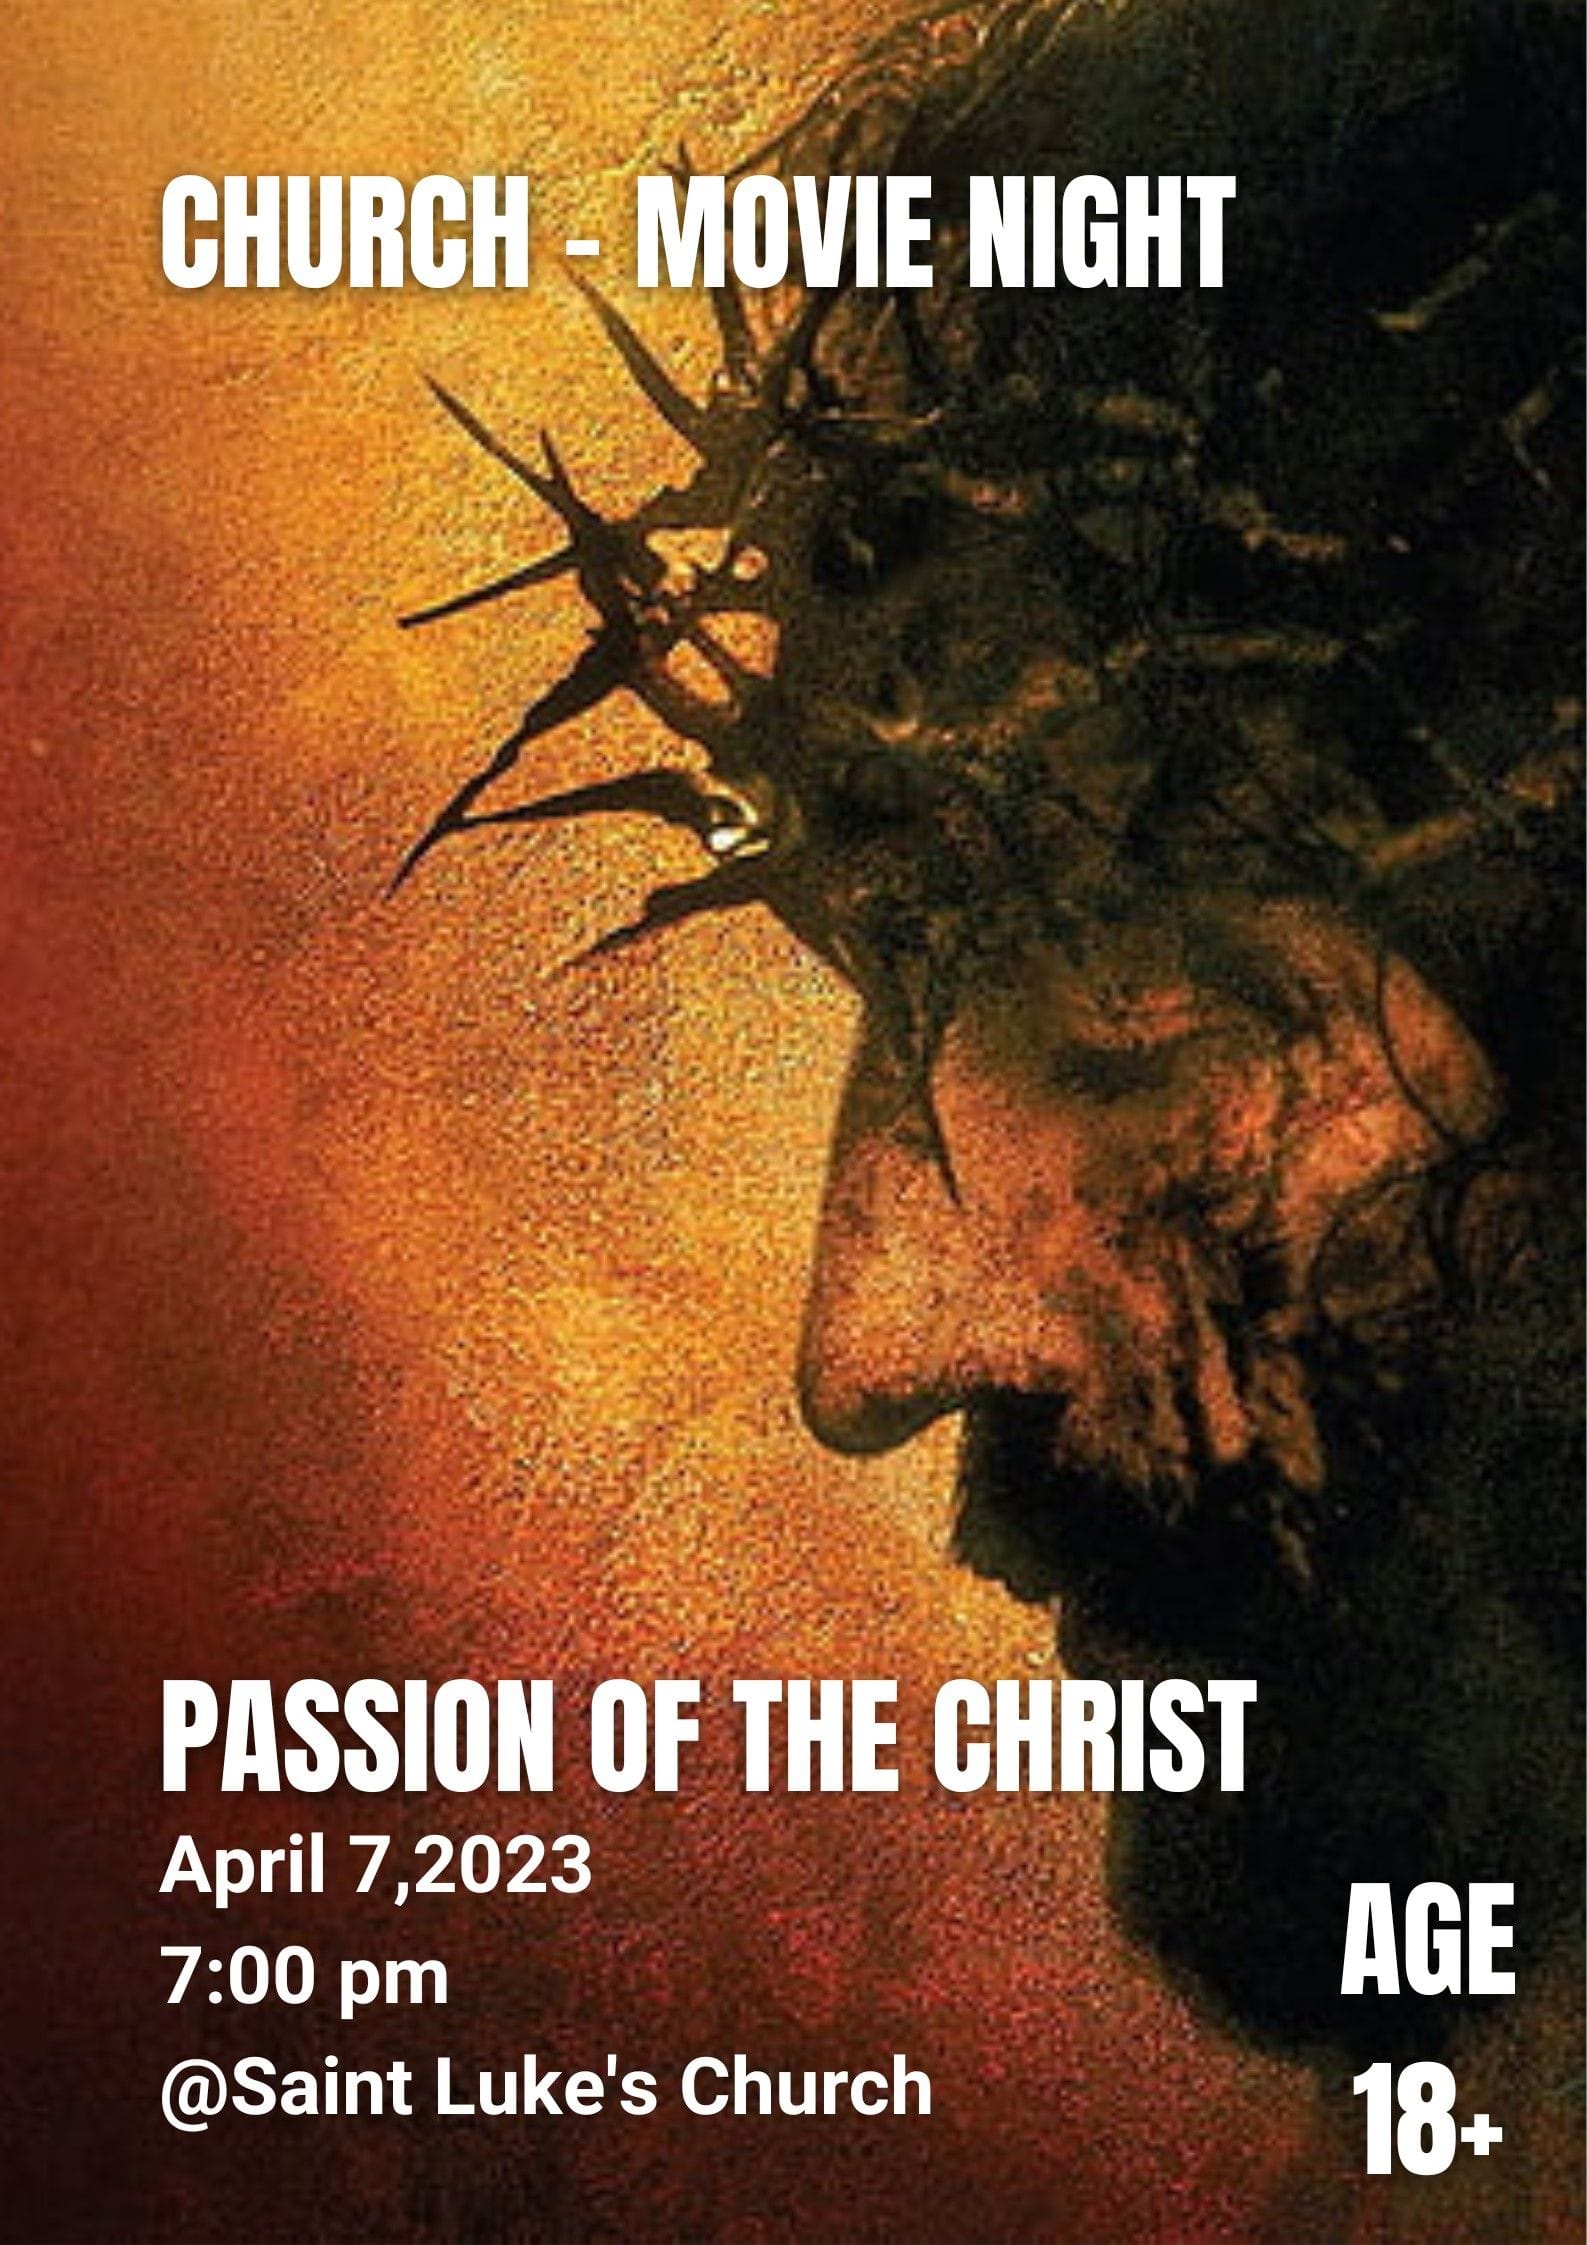 Passion of the Christ - the Movie